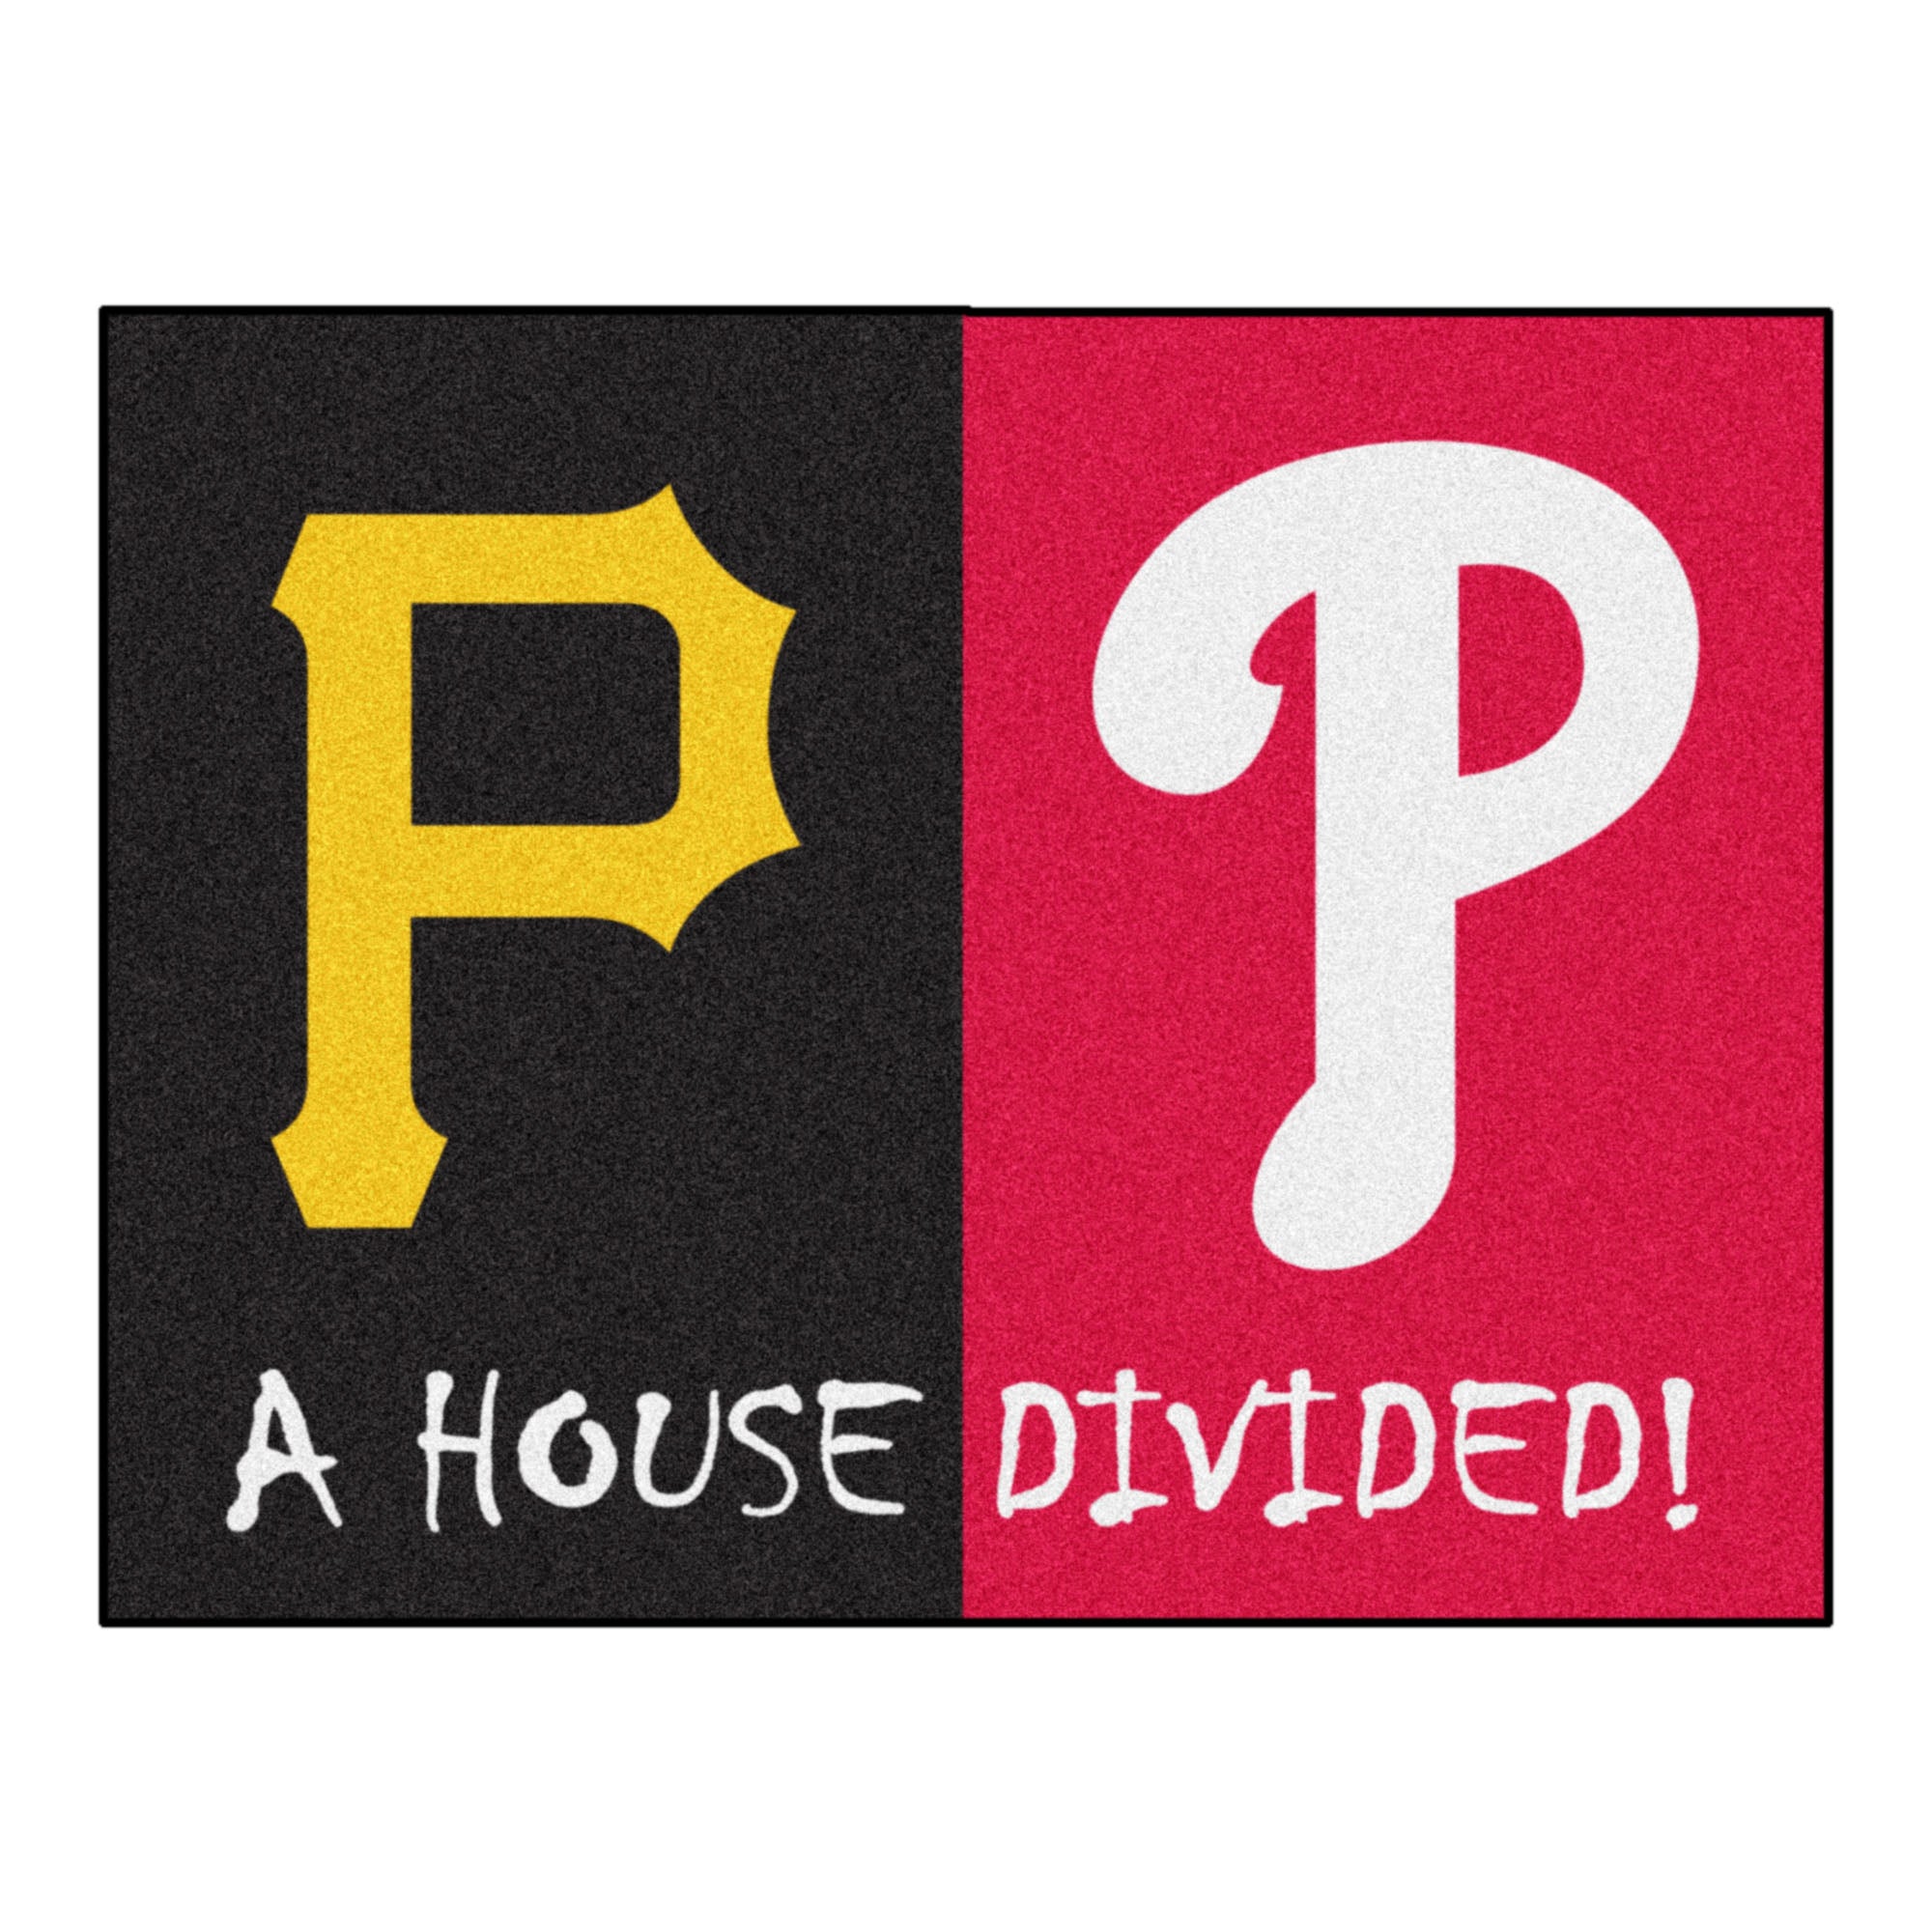 Fanmat - Mlb house divided - pirates / phillies house divided mat